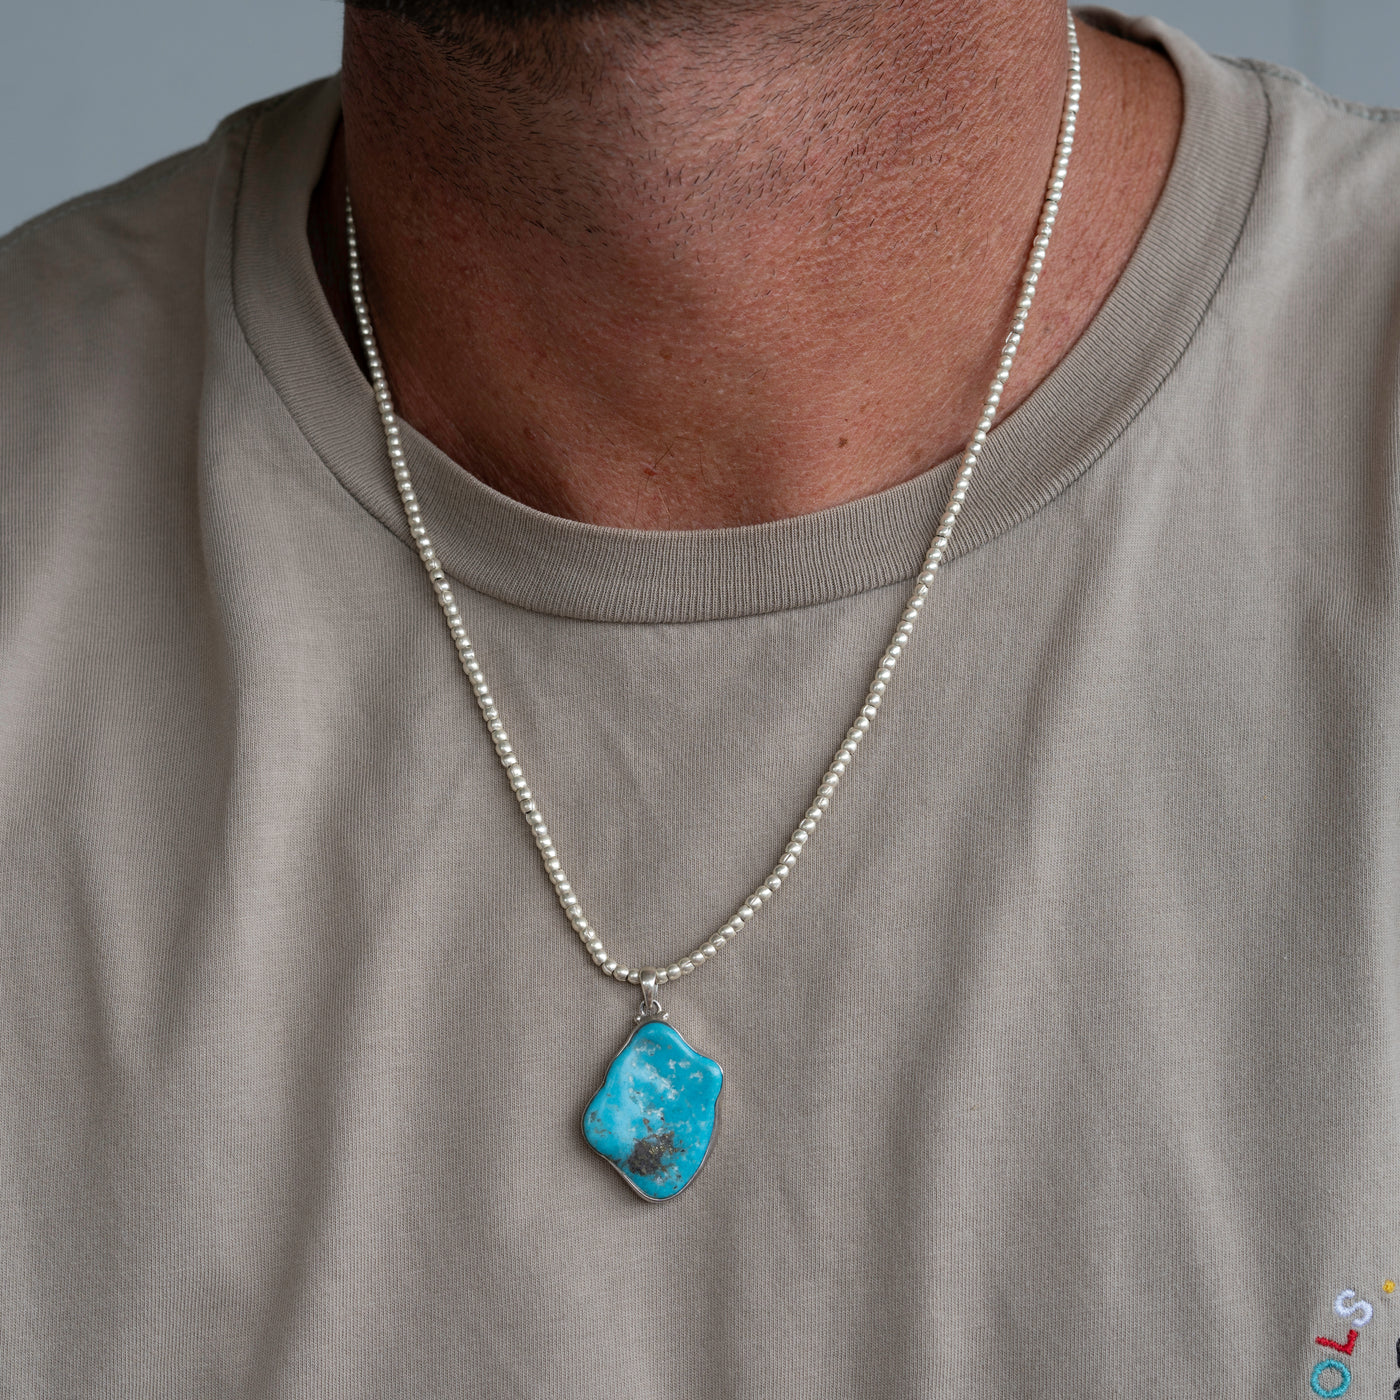 Men's Raw Turquoise Necklace